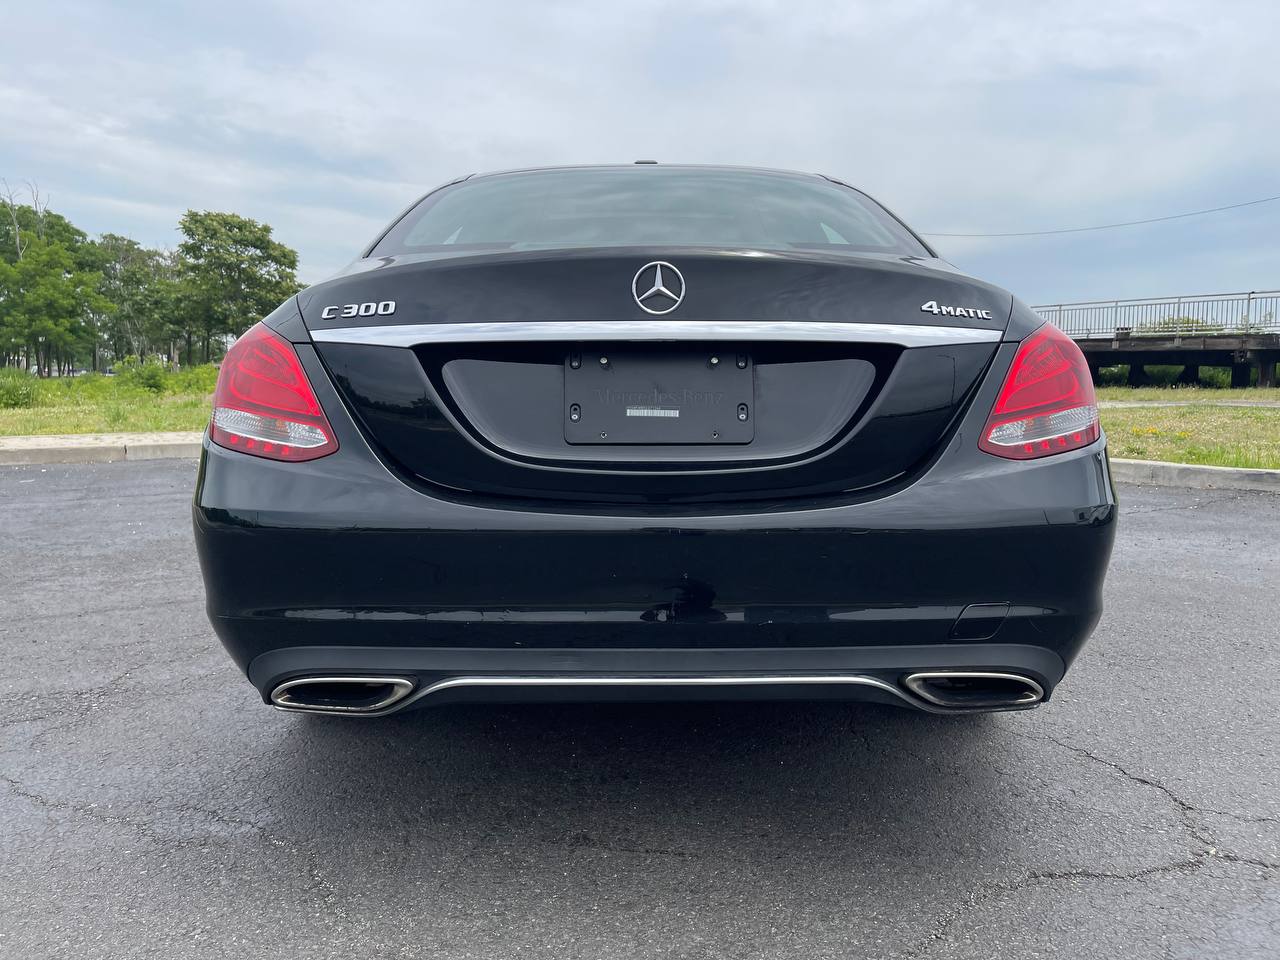 Used - Mercedes-Benz C 300 4MATIC AWD Sedan for sale in Staten Island NY